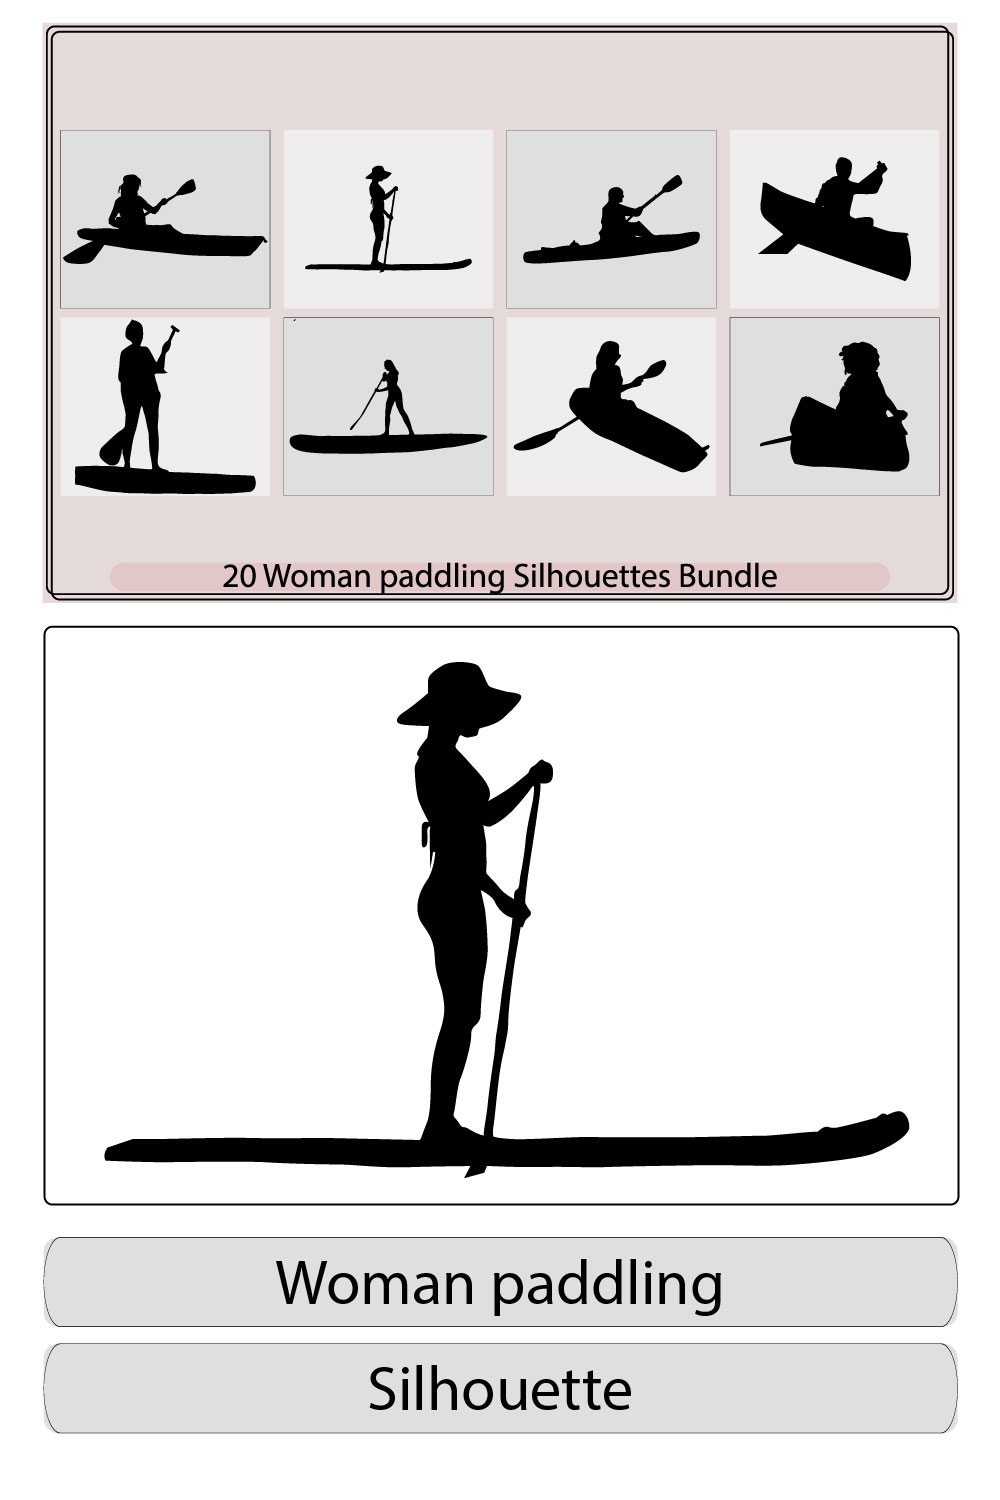 Stand Up paddle silhouette a woman is standing on a boat, Standup paddleboarding,Canoe paddle Silhouette,Woman posing with surfboard and paddle,Man and woman standing on the paddleboards pinterest preview image.